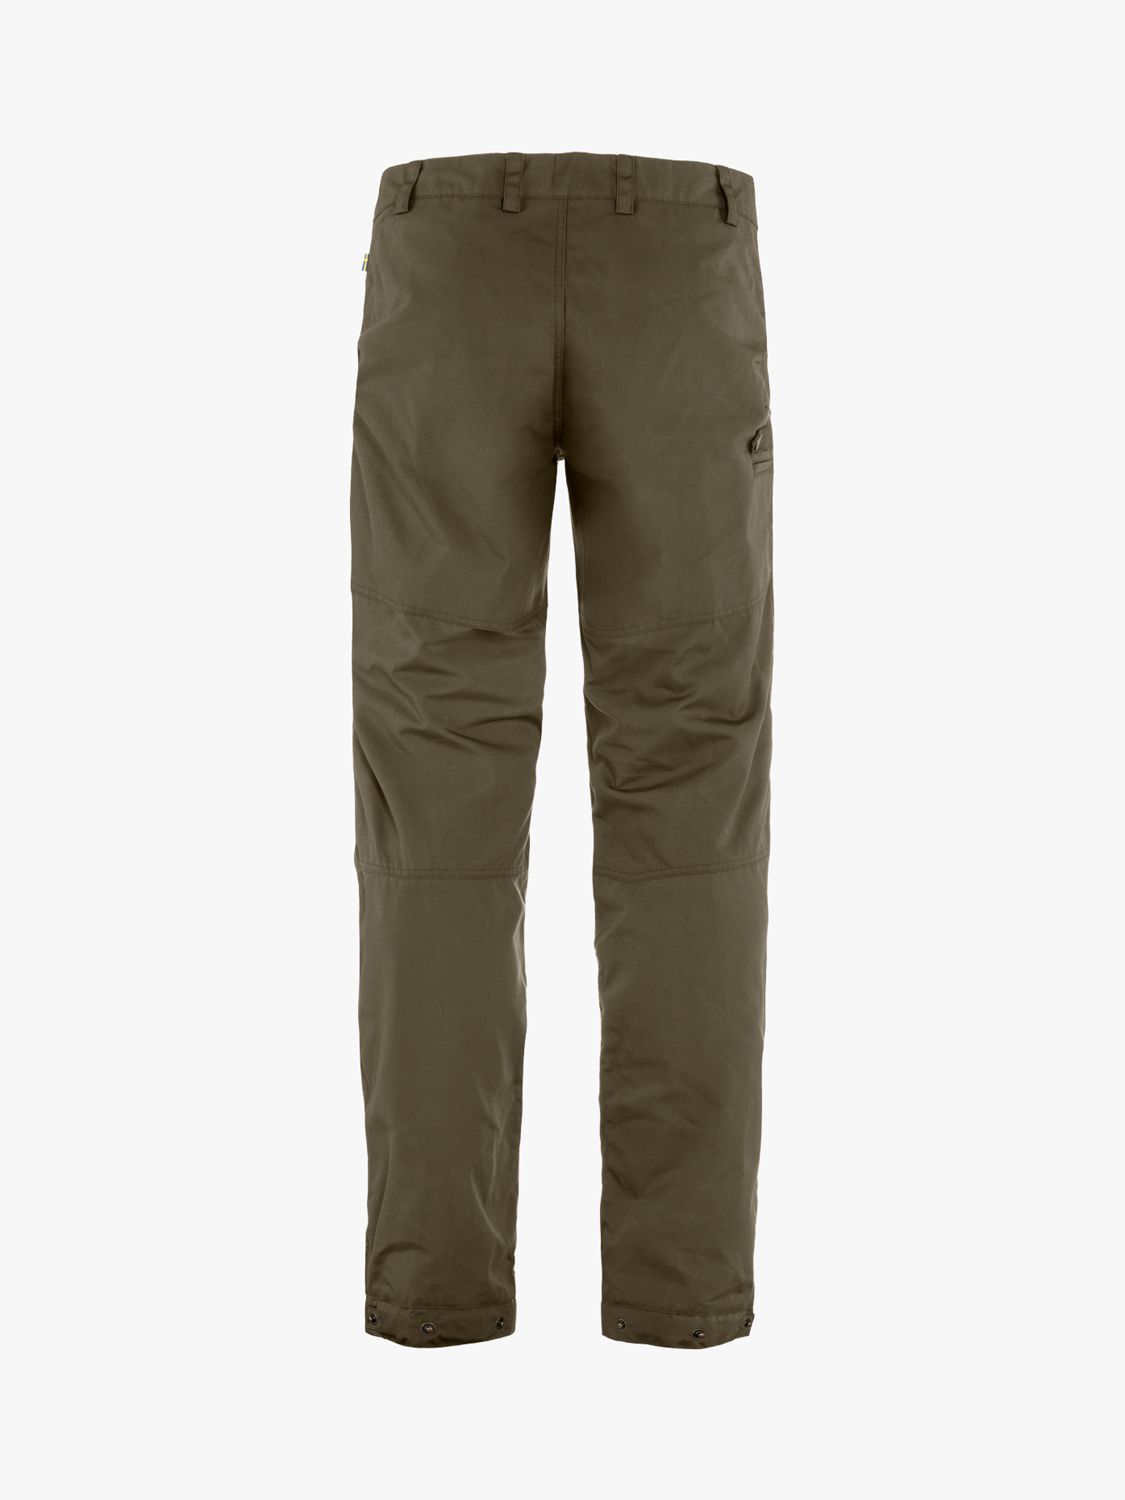 Buy Fjällräven Greenland Trail Trousers, Olive Green Online at johnlewis.com